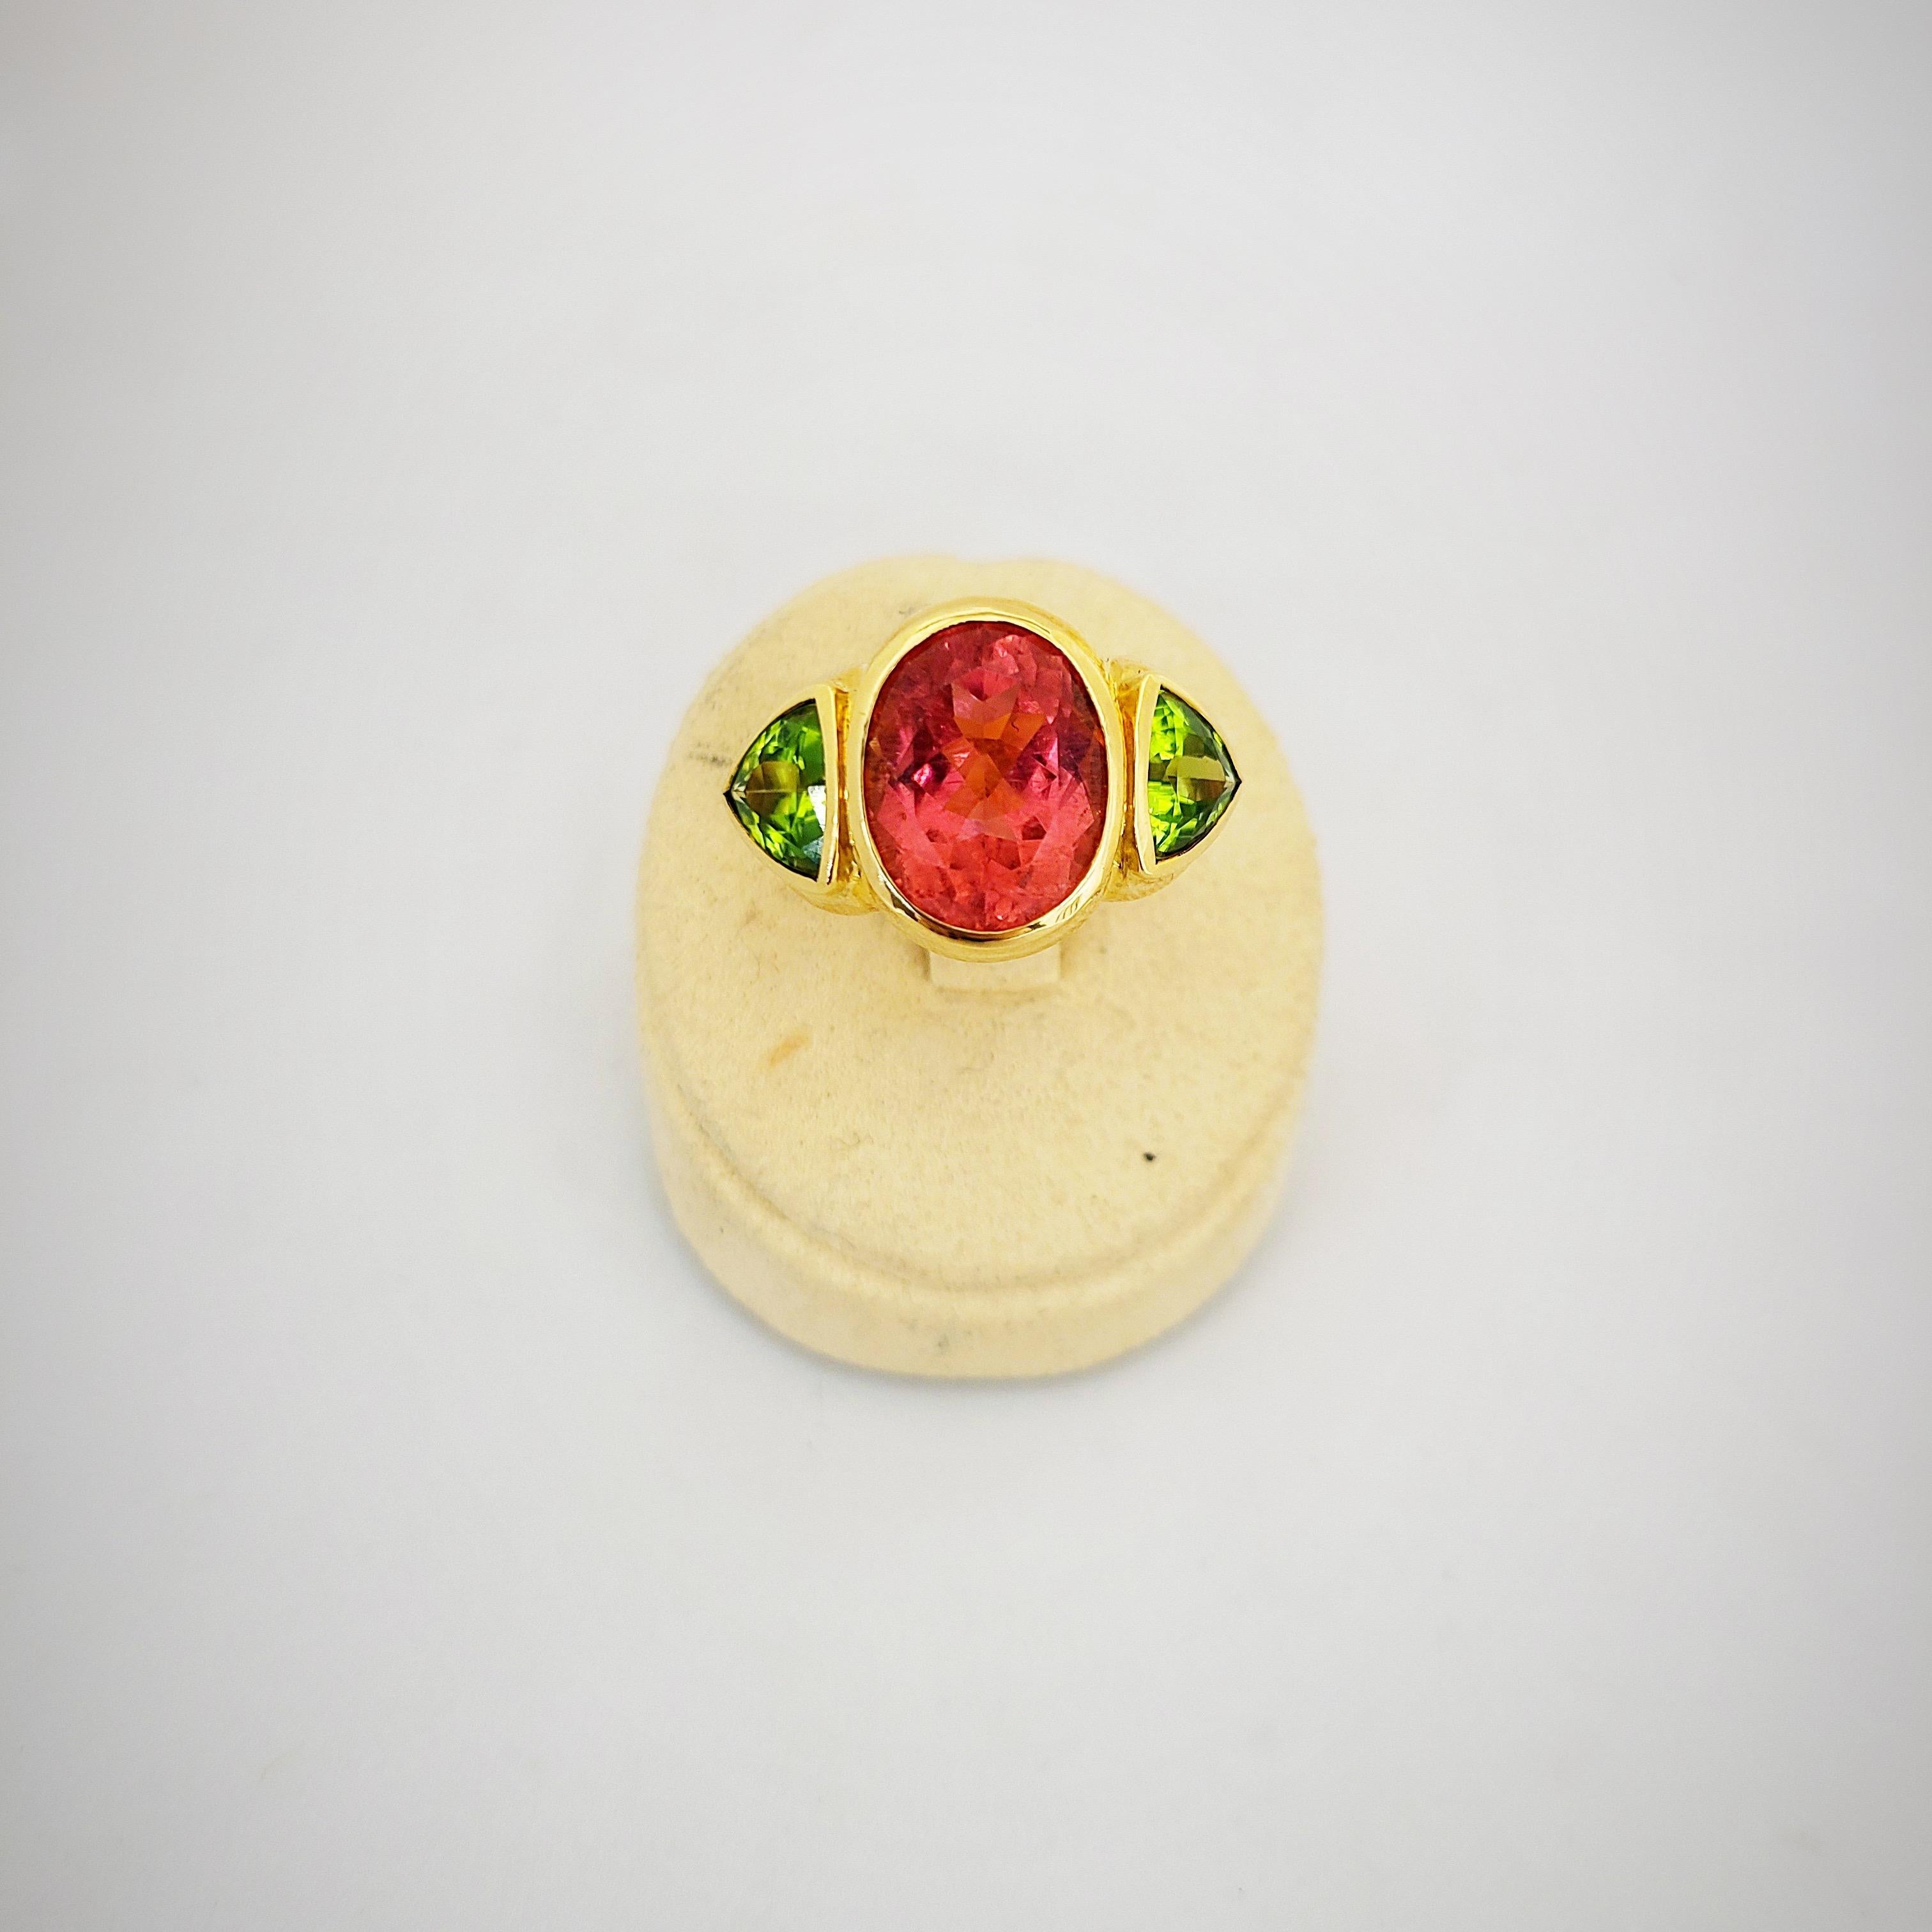 Oval Cut Cellini 18KT Yellow Gold Ring with 8.05 Carat Rubellite and 3.46 Carat Peridot For Sale